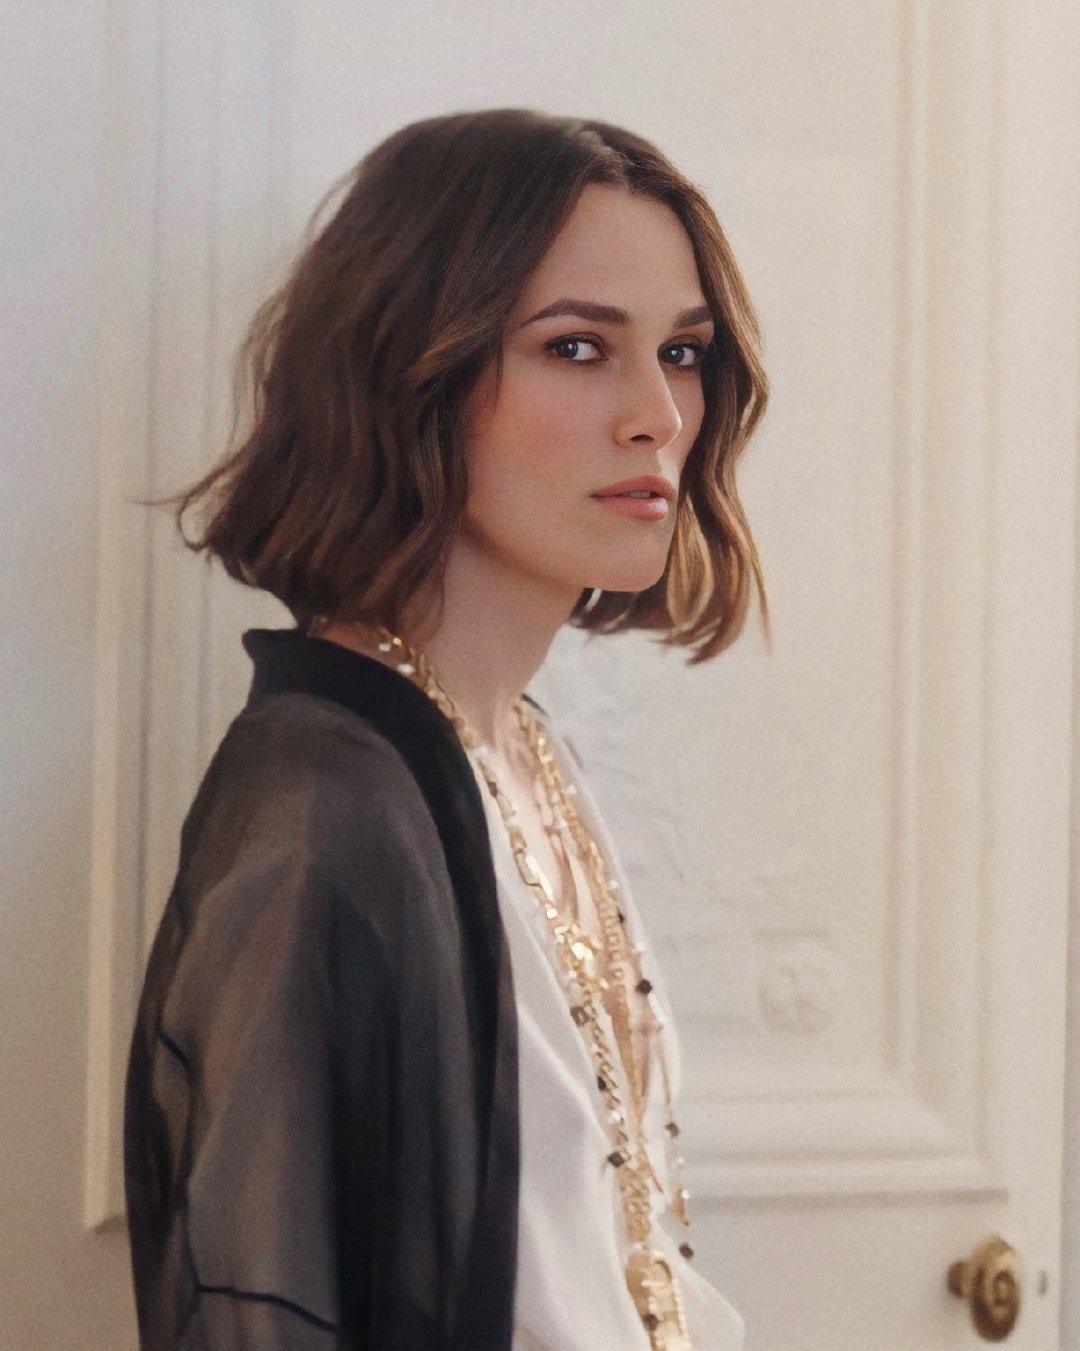 stunning females — Keira Knightley features in the latest